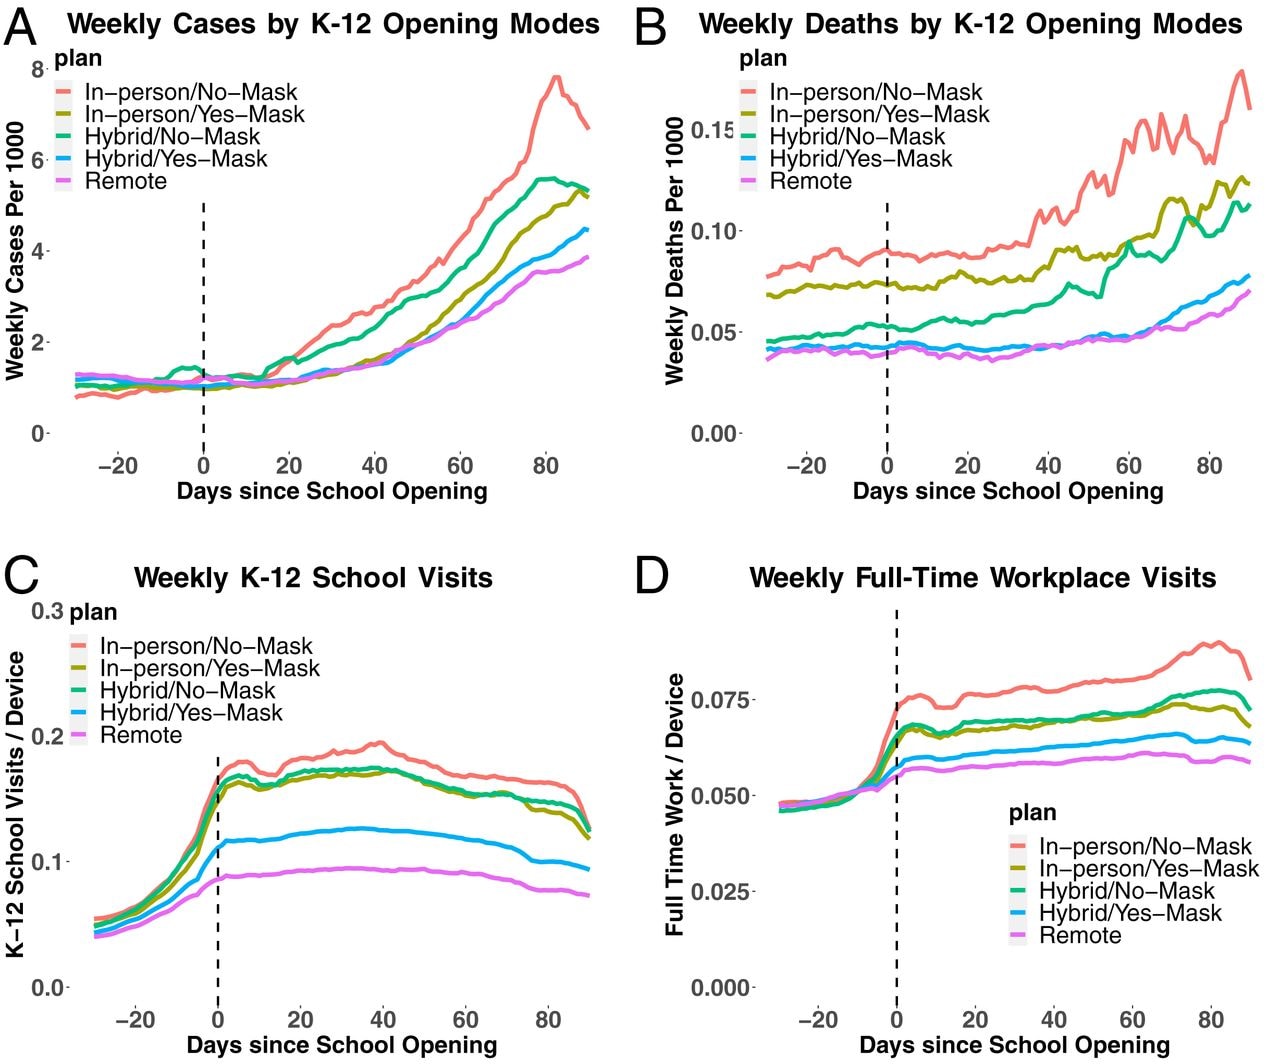 Weekly cases and weekly deaths by school opening modes, weekly school visits, weekly full-time workplace visits